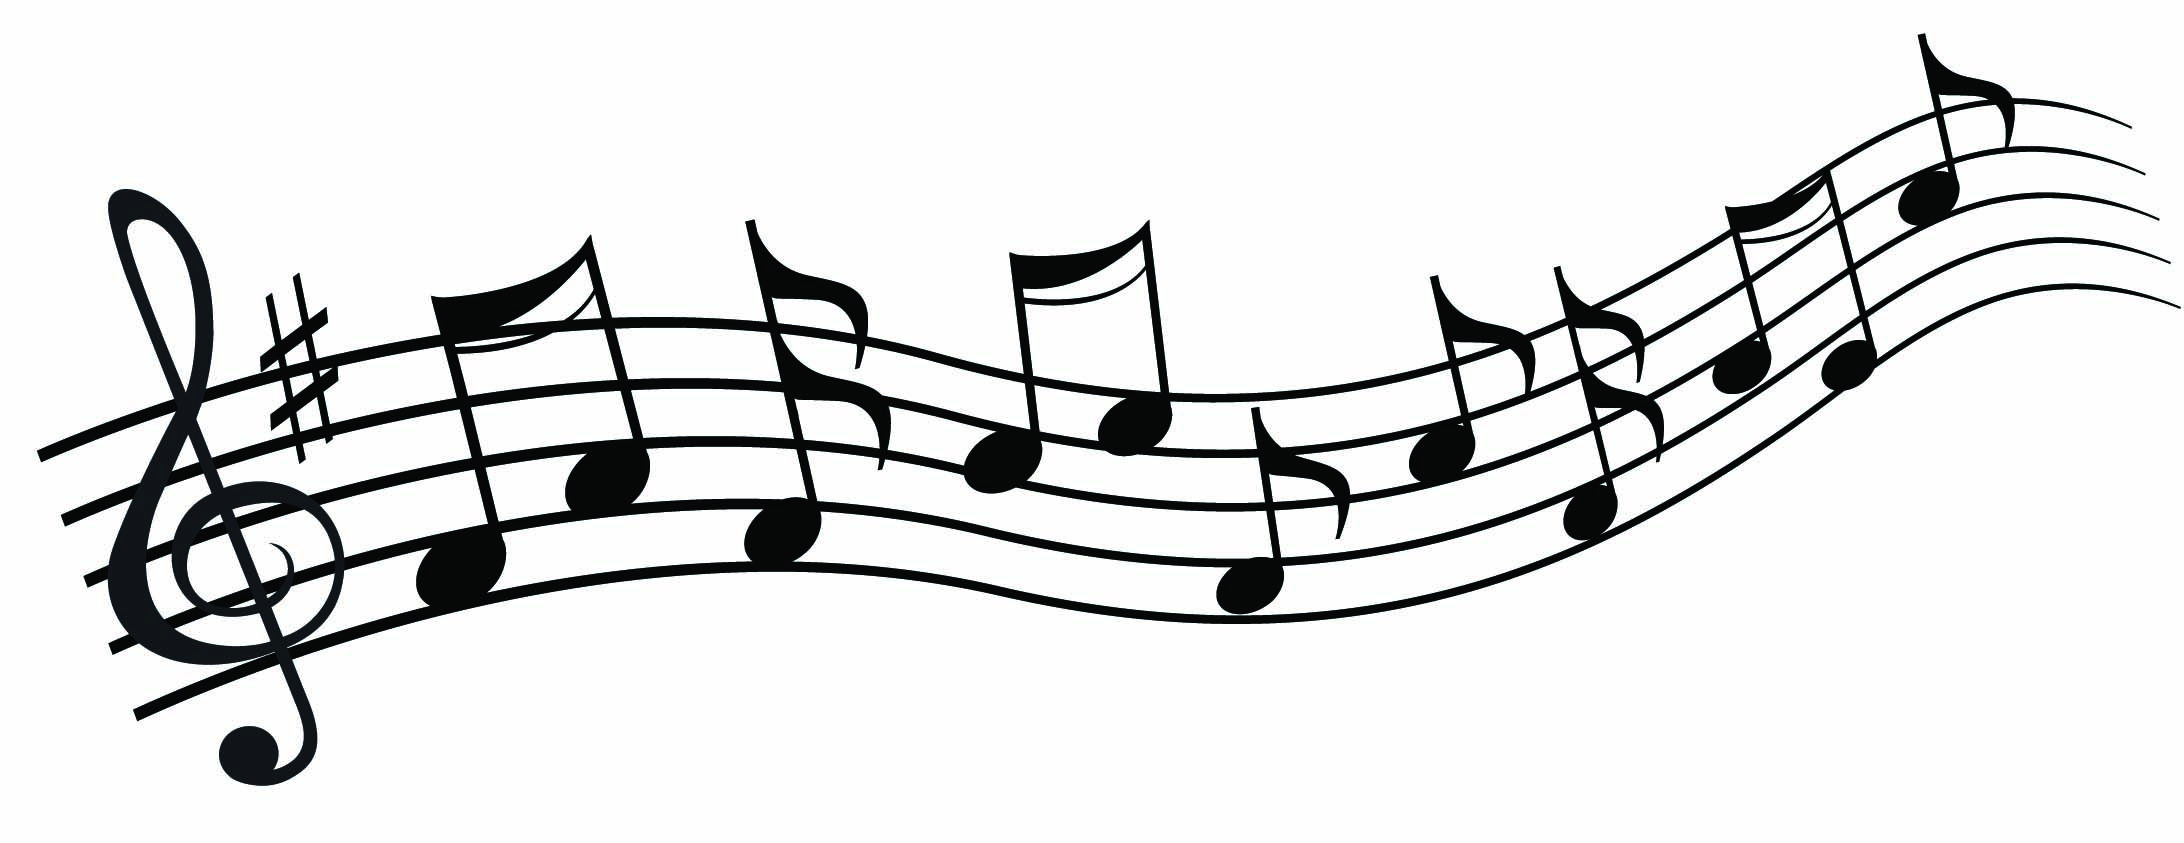 clipart music images - photo #37